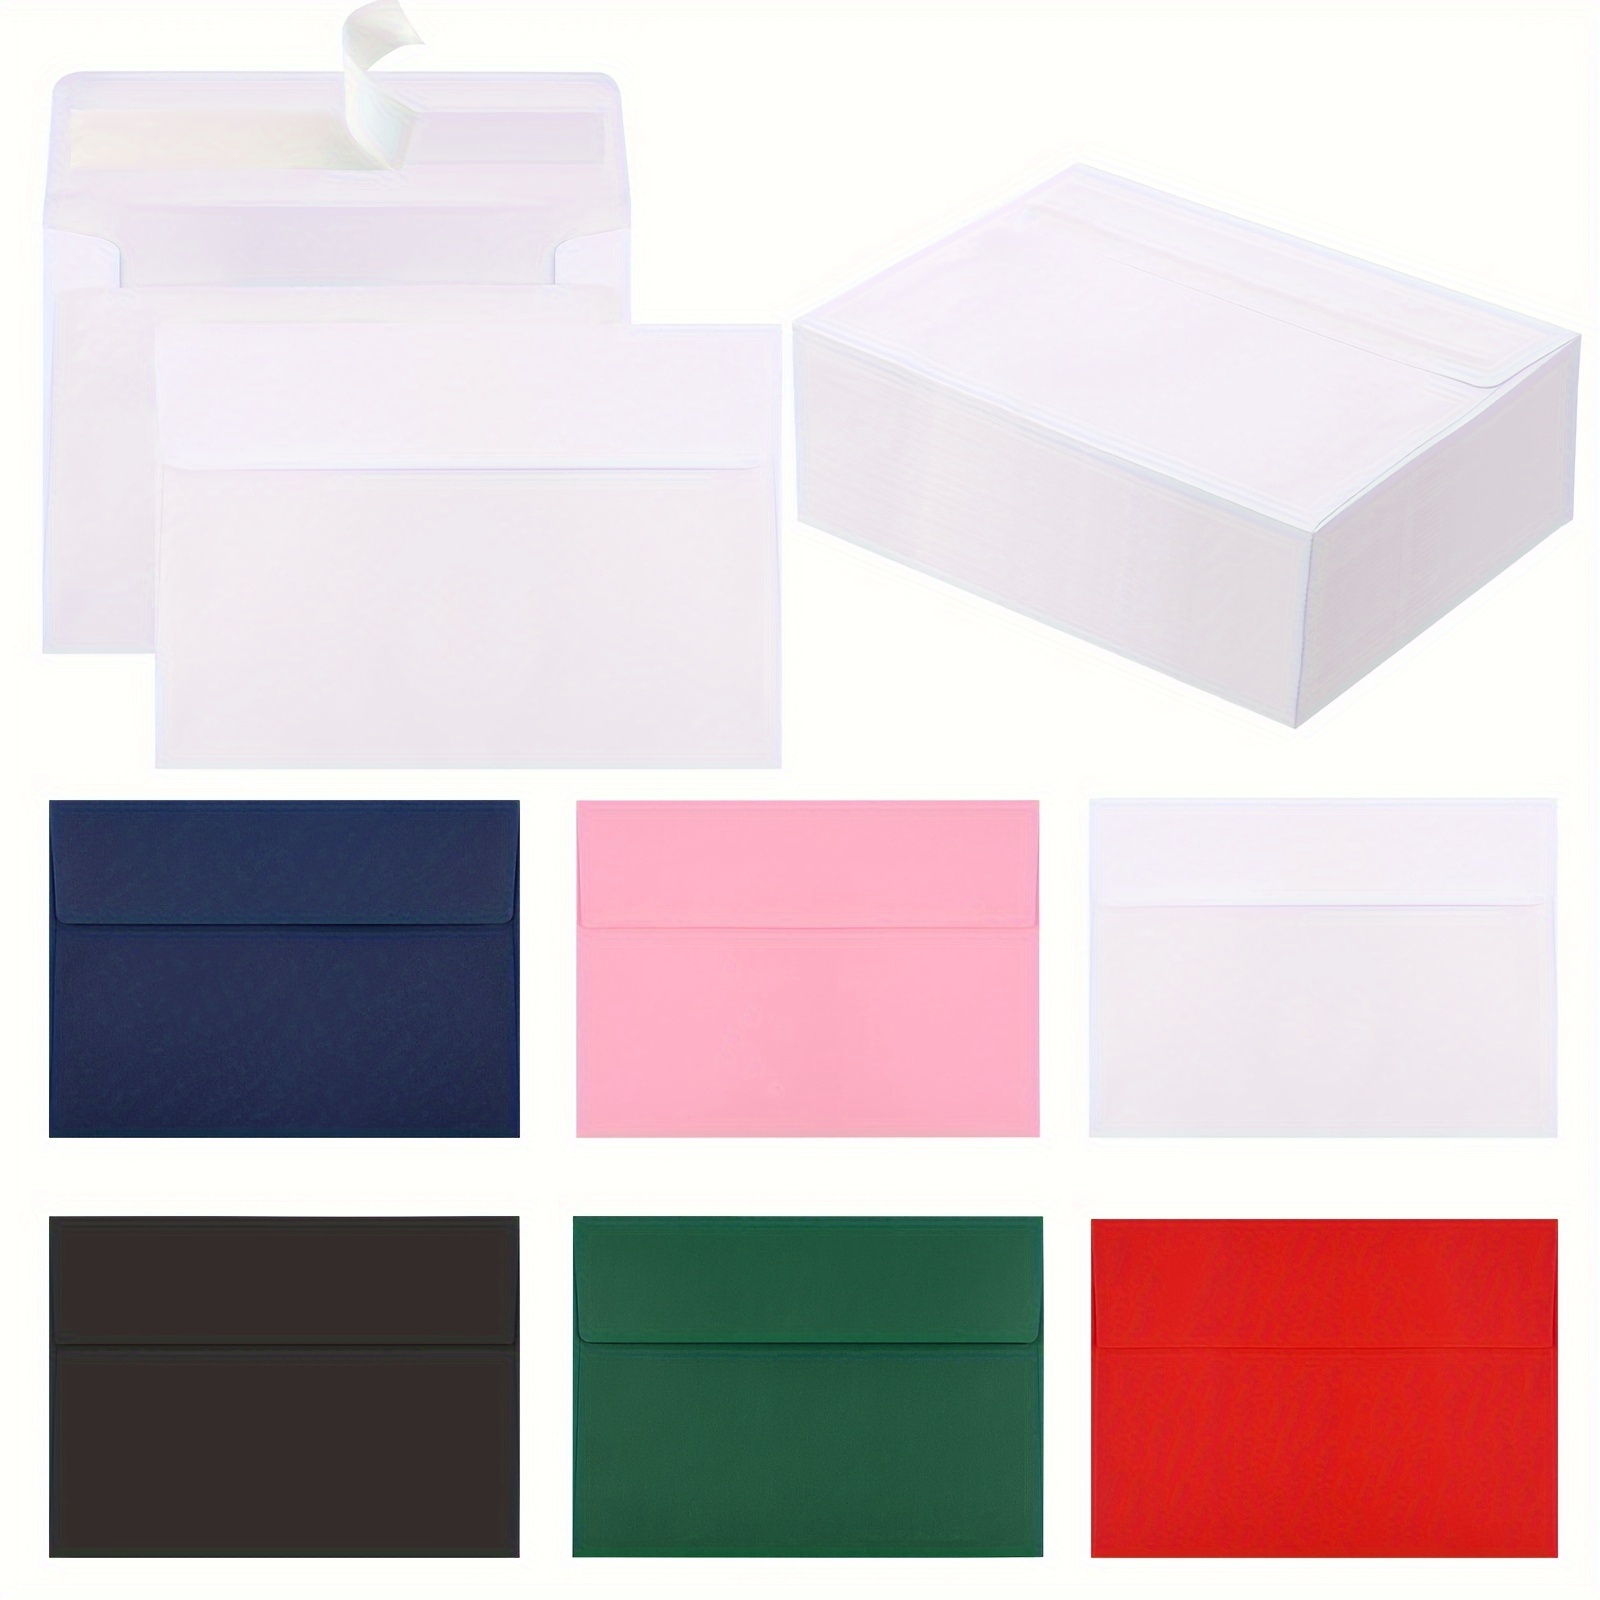 PREMIUM 20 Pack 5x7 Envelopes for Invitations with Cards Self Seal